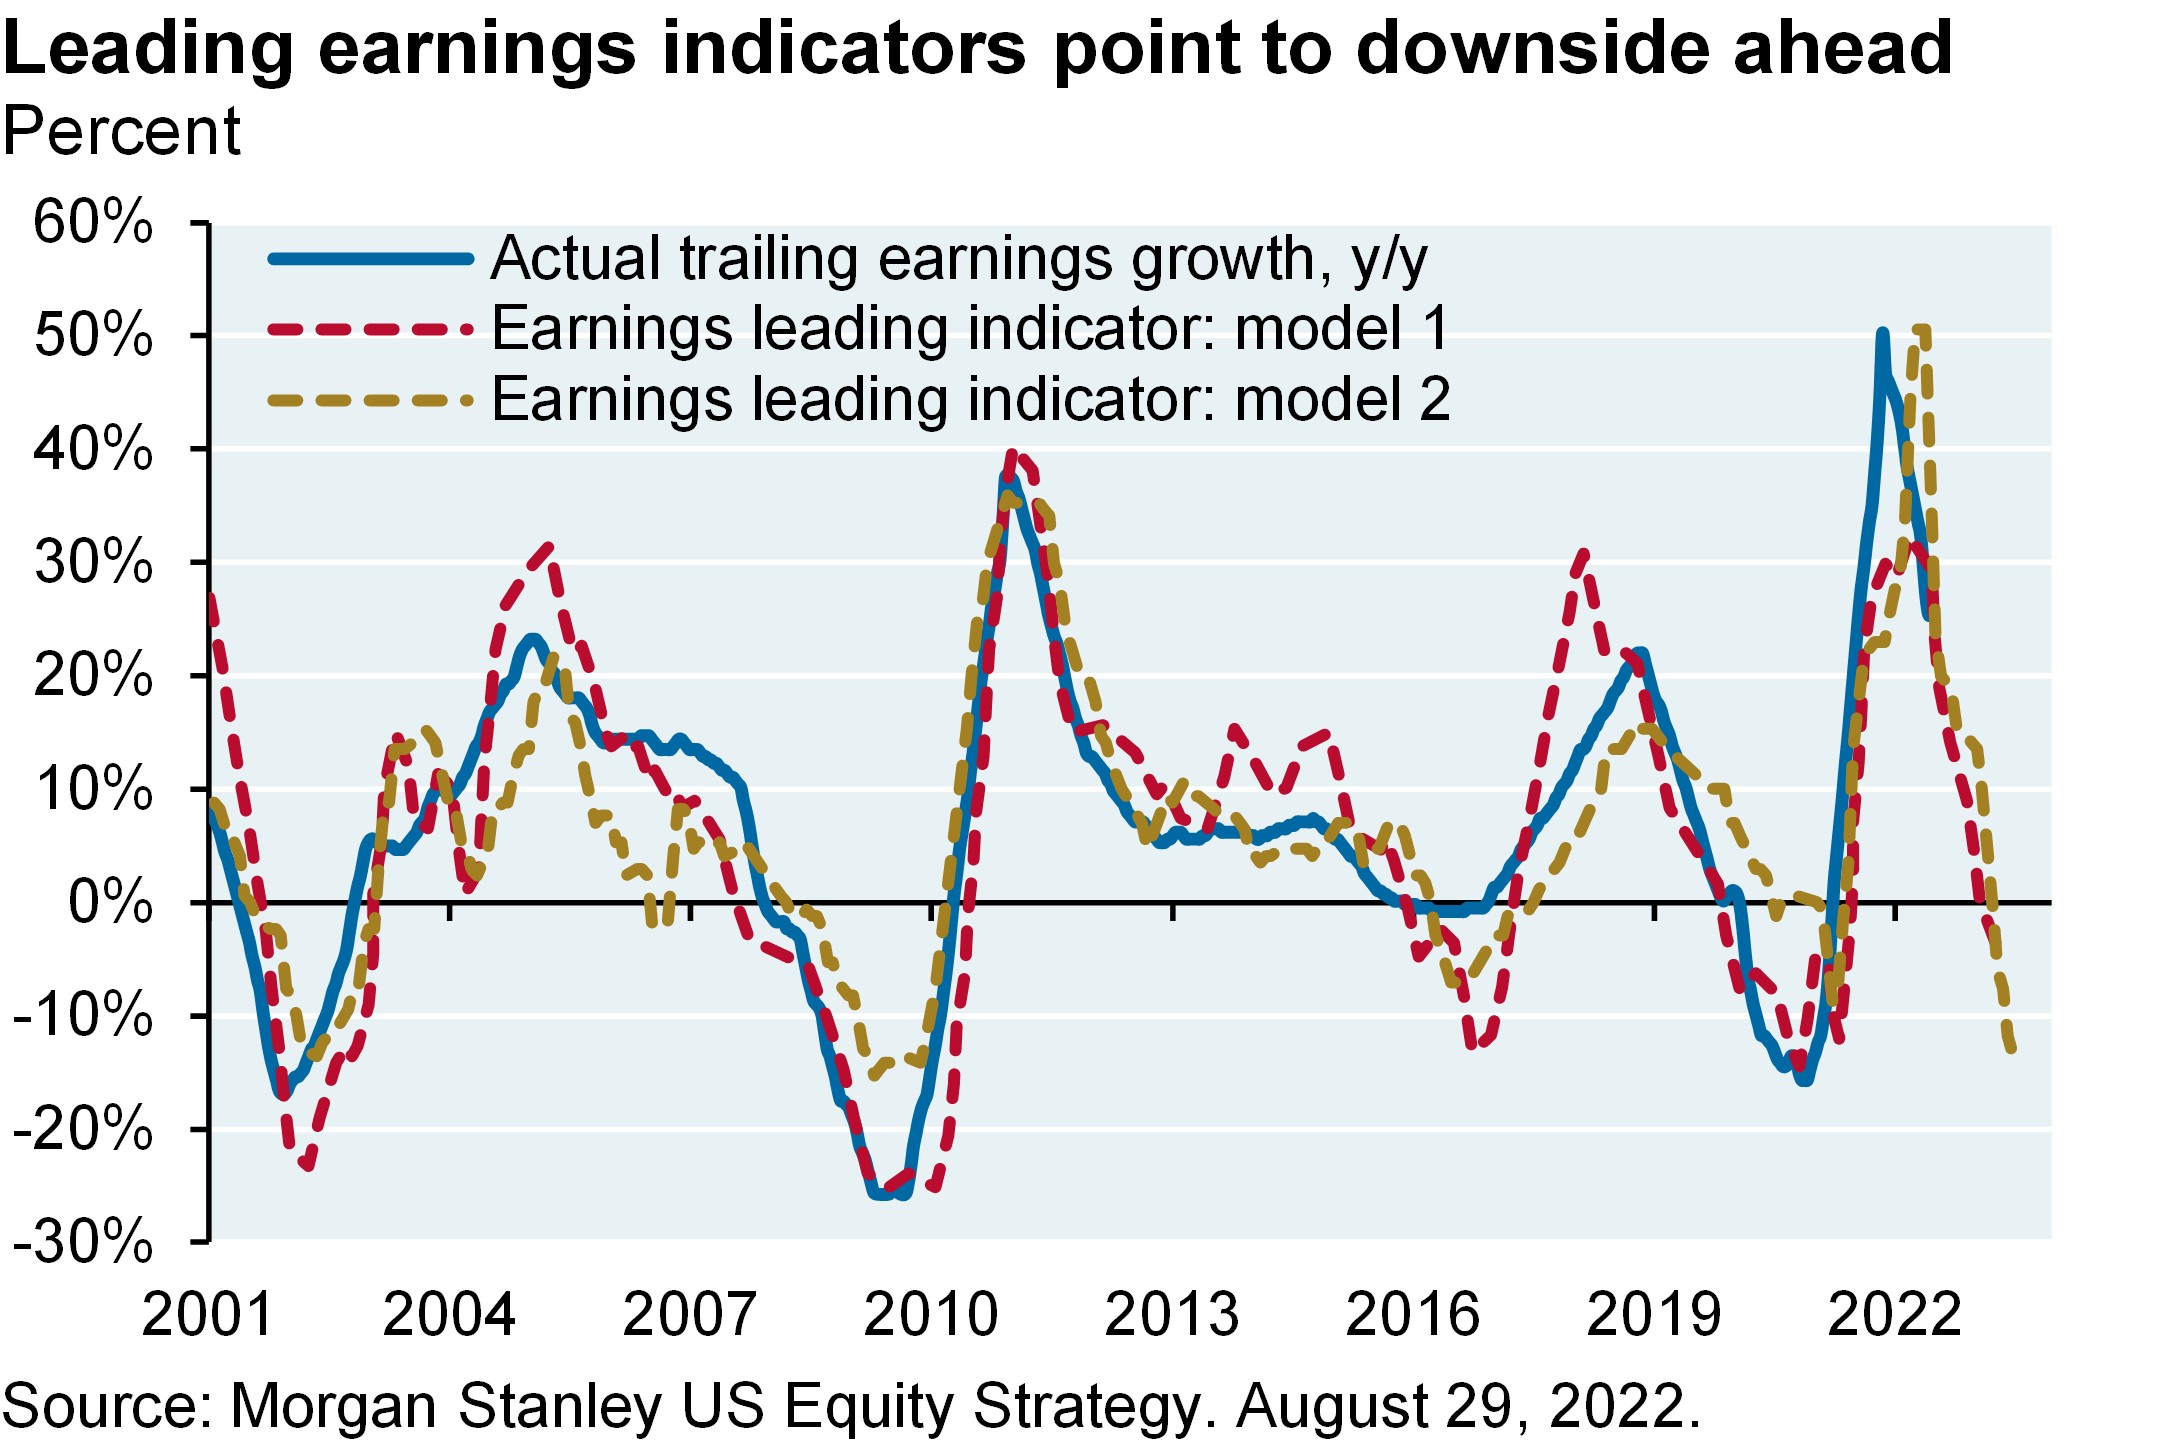 Line chart compares actual trailing earnings growth year-over-year to two earnings leading indicator models from 2001 to now. The models closely follow actual trailing earnings growth and point to more earnings declines ahead. 